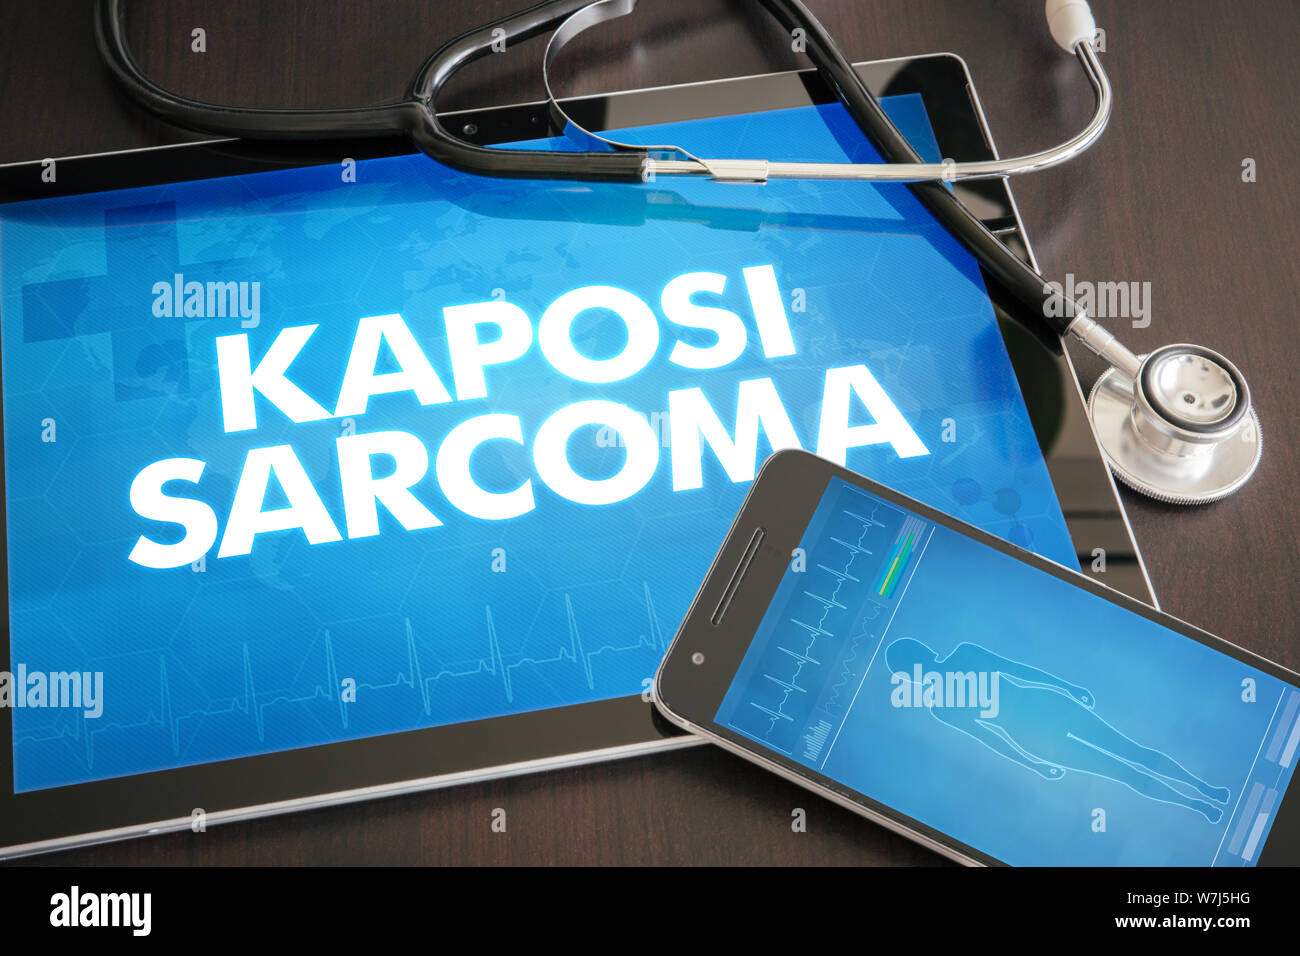 Kaposi sarcoma (cancer type) diagnosis medical concept on tablet screen with stethoscope. Stock Photo